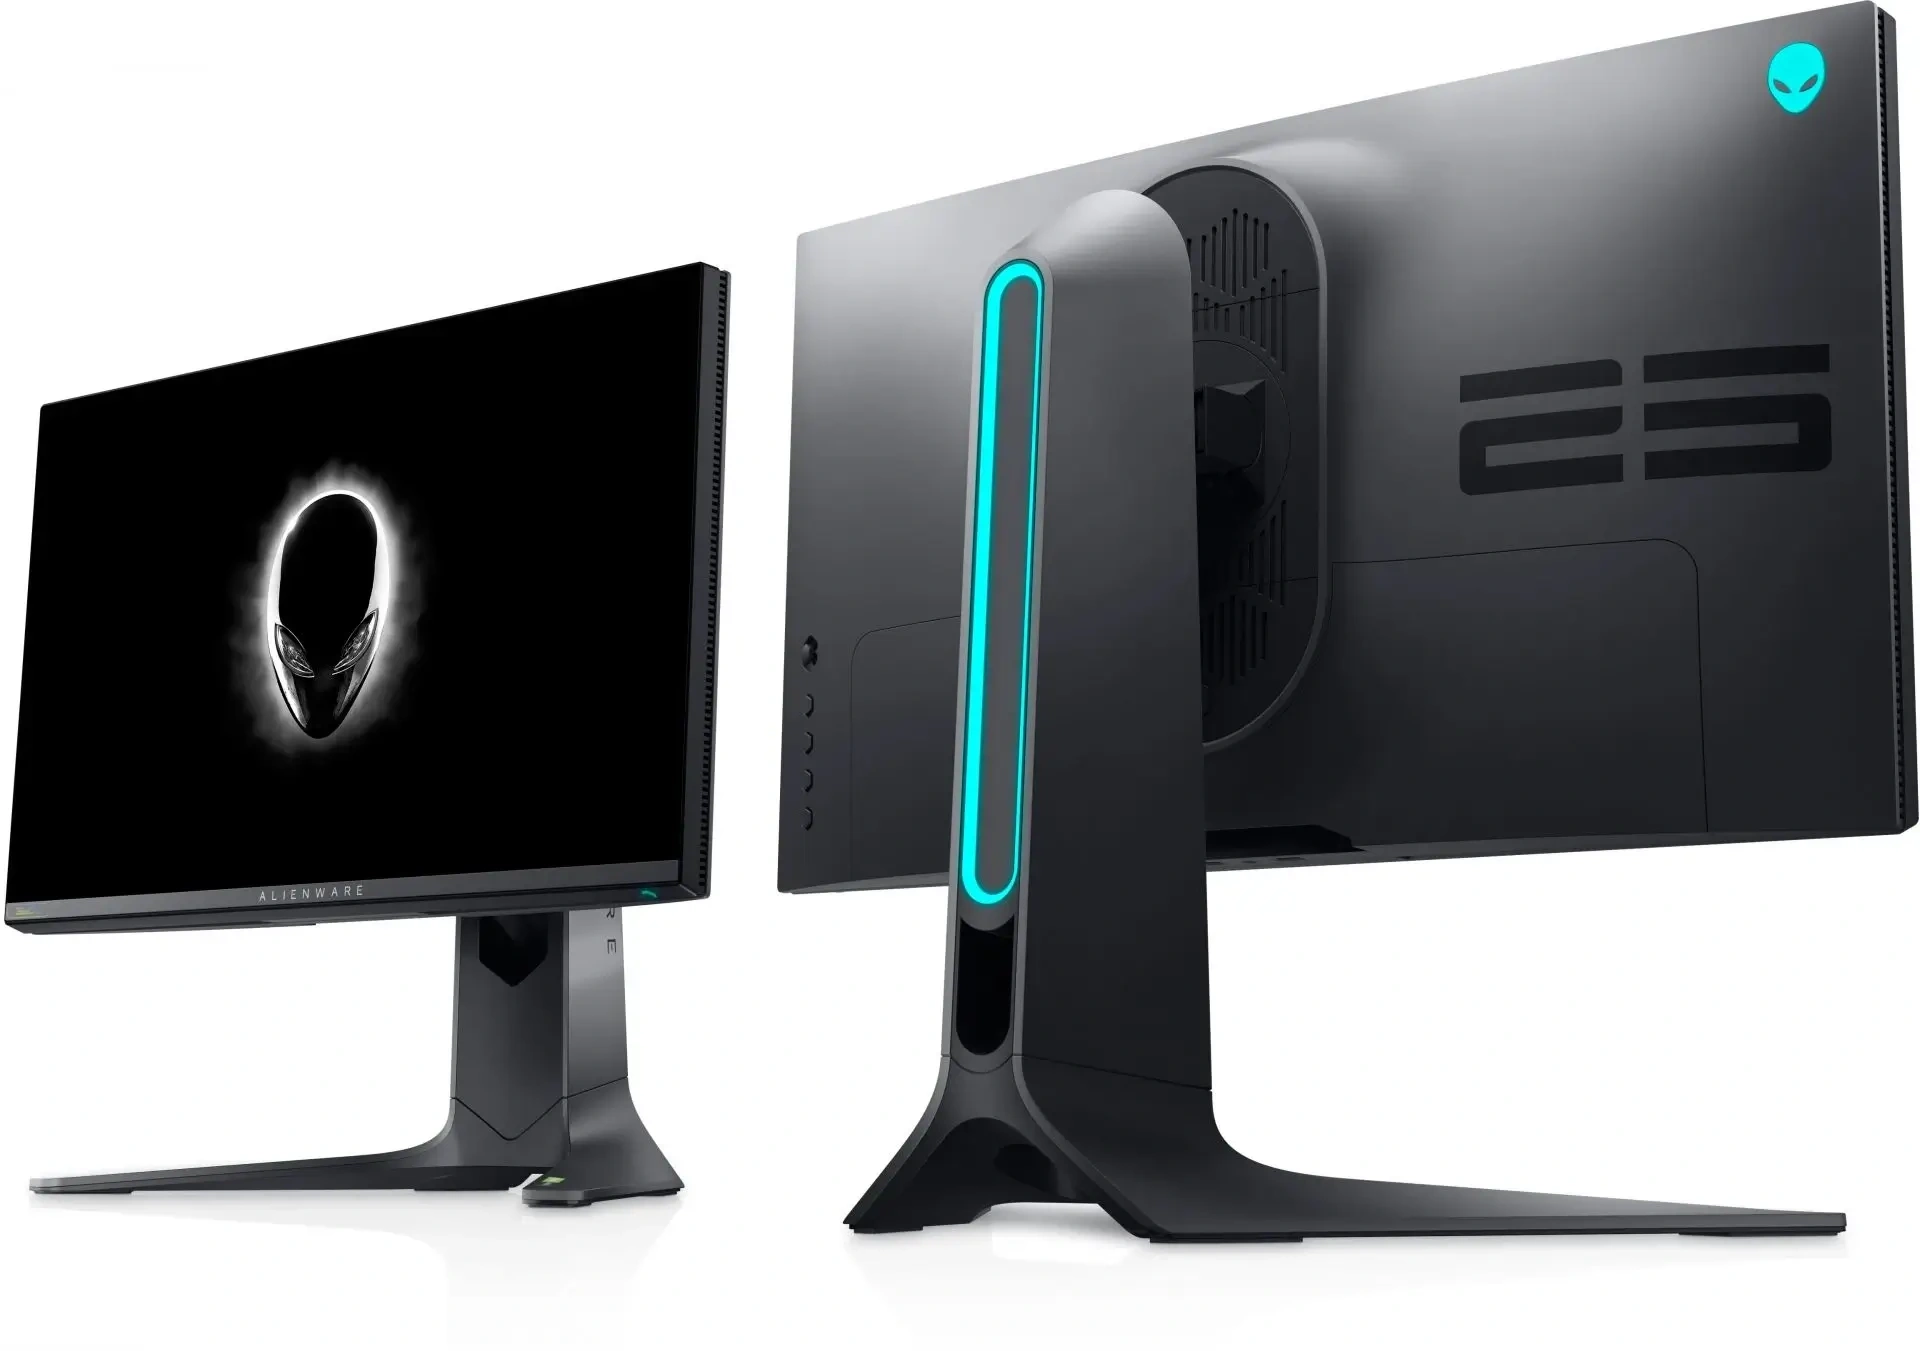 Alienware 25 AW2521H